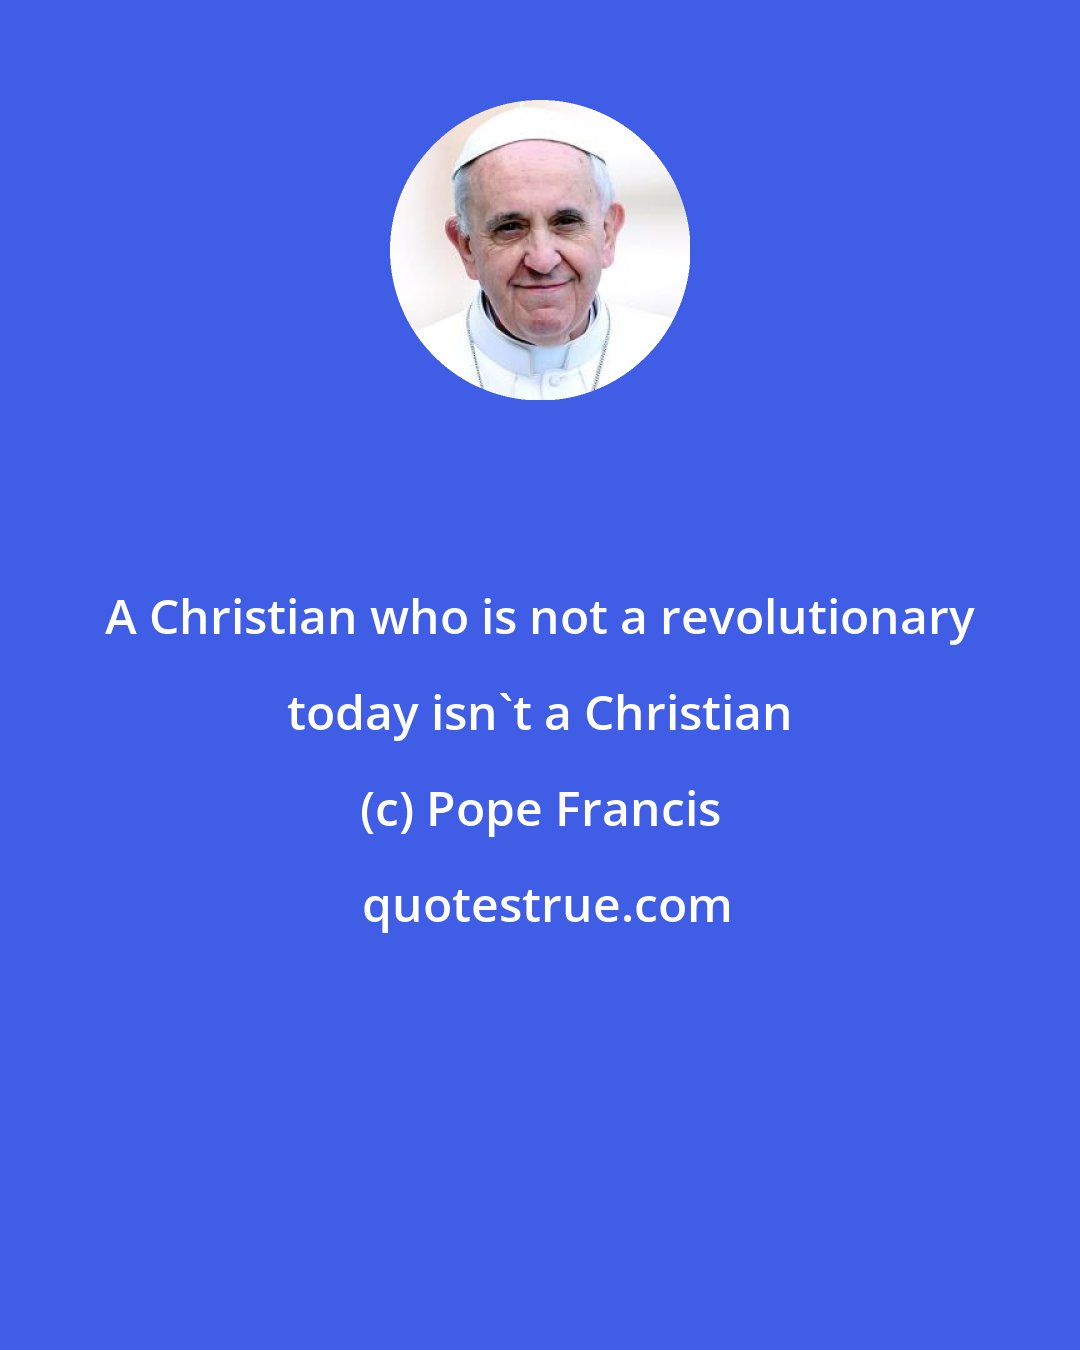 Pope Francis: A Christian who is not a revolutionary today isn't a Christian